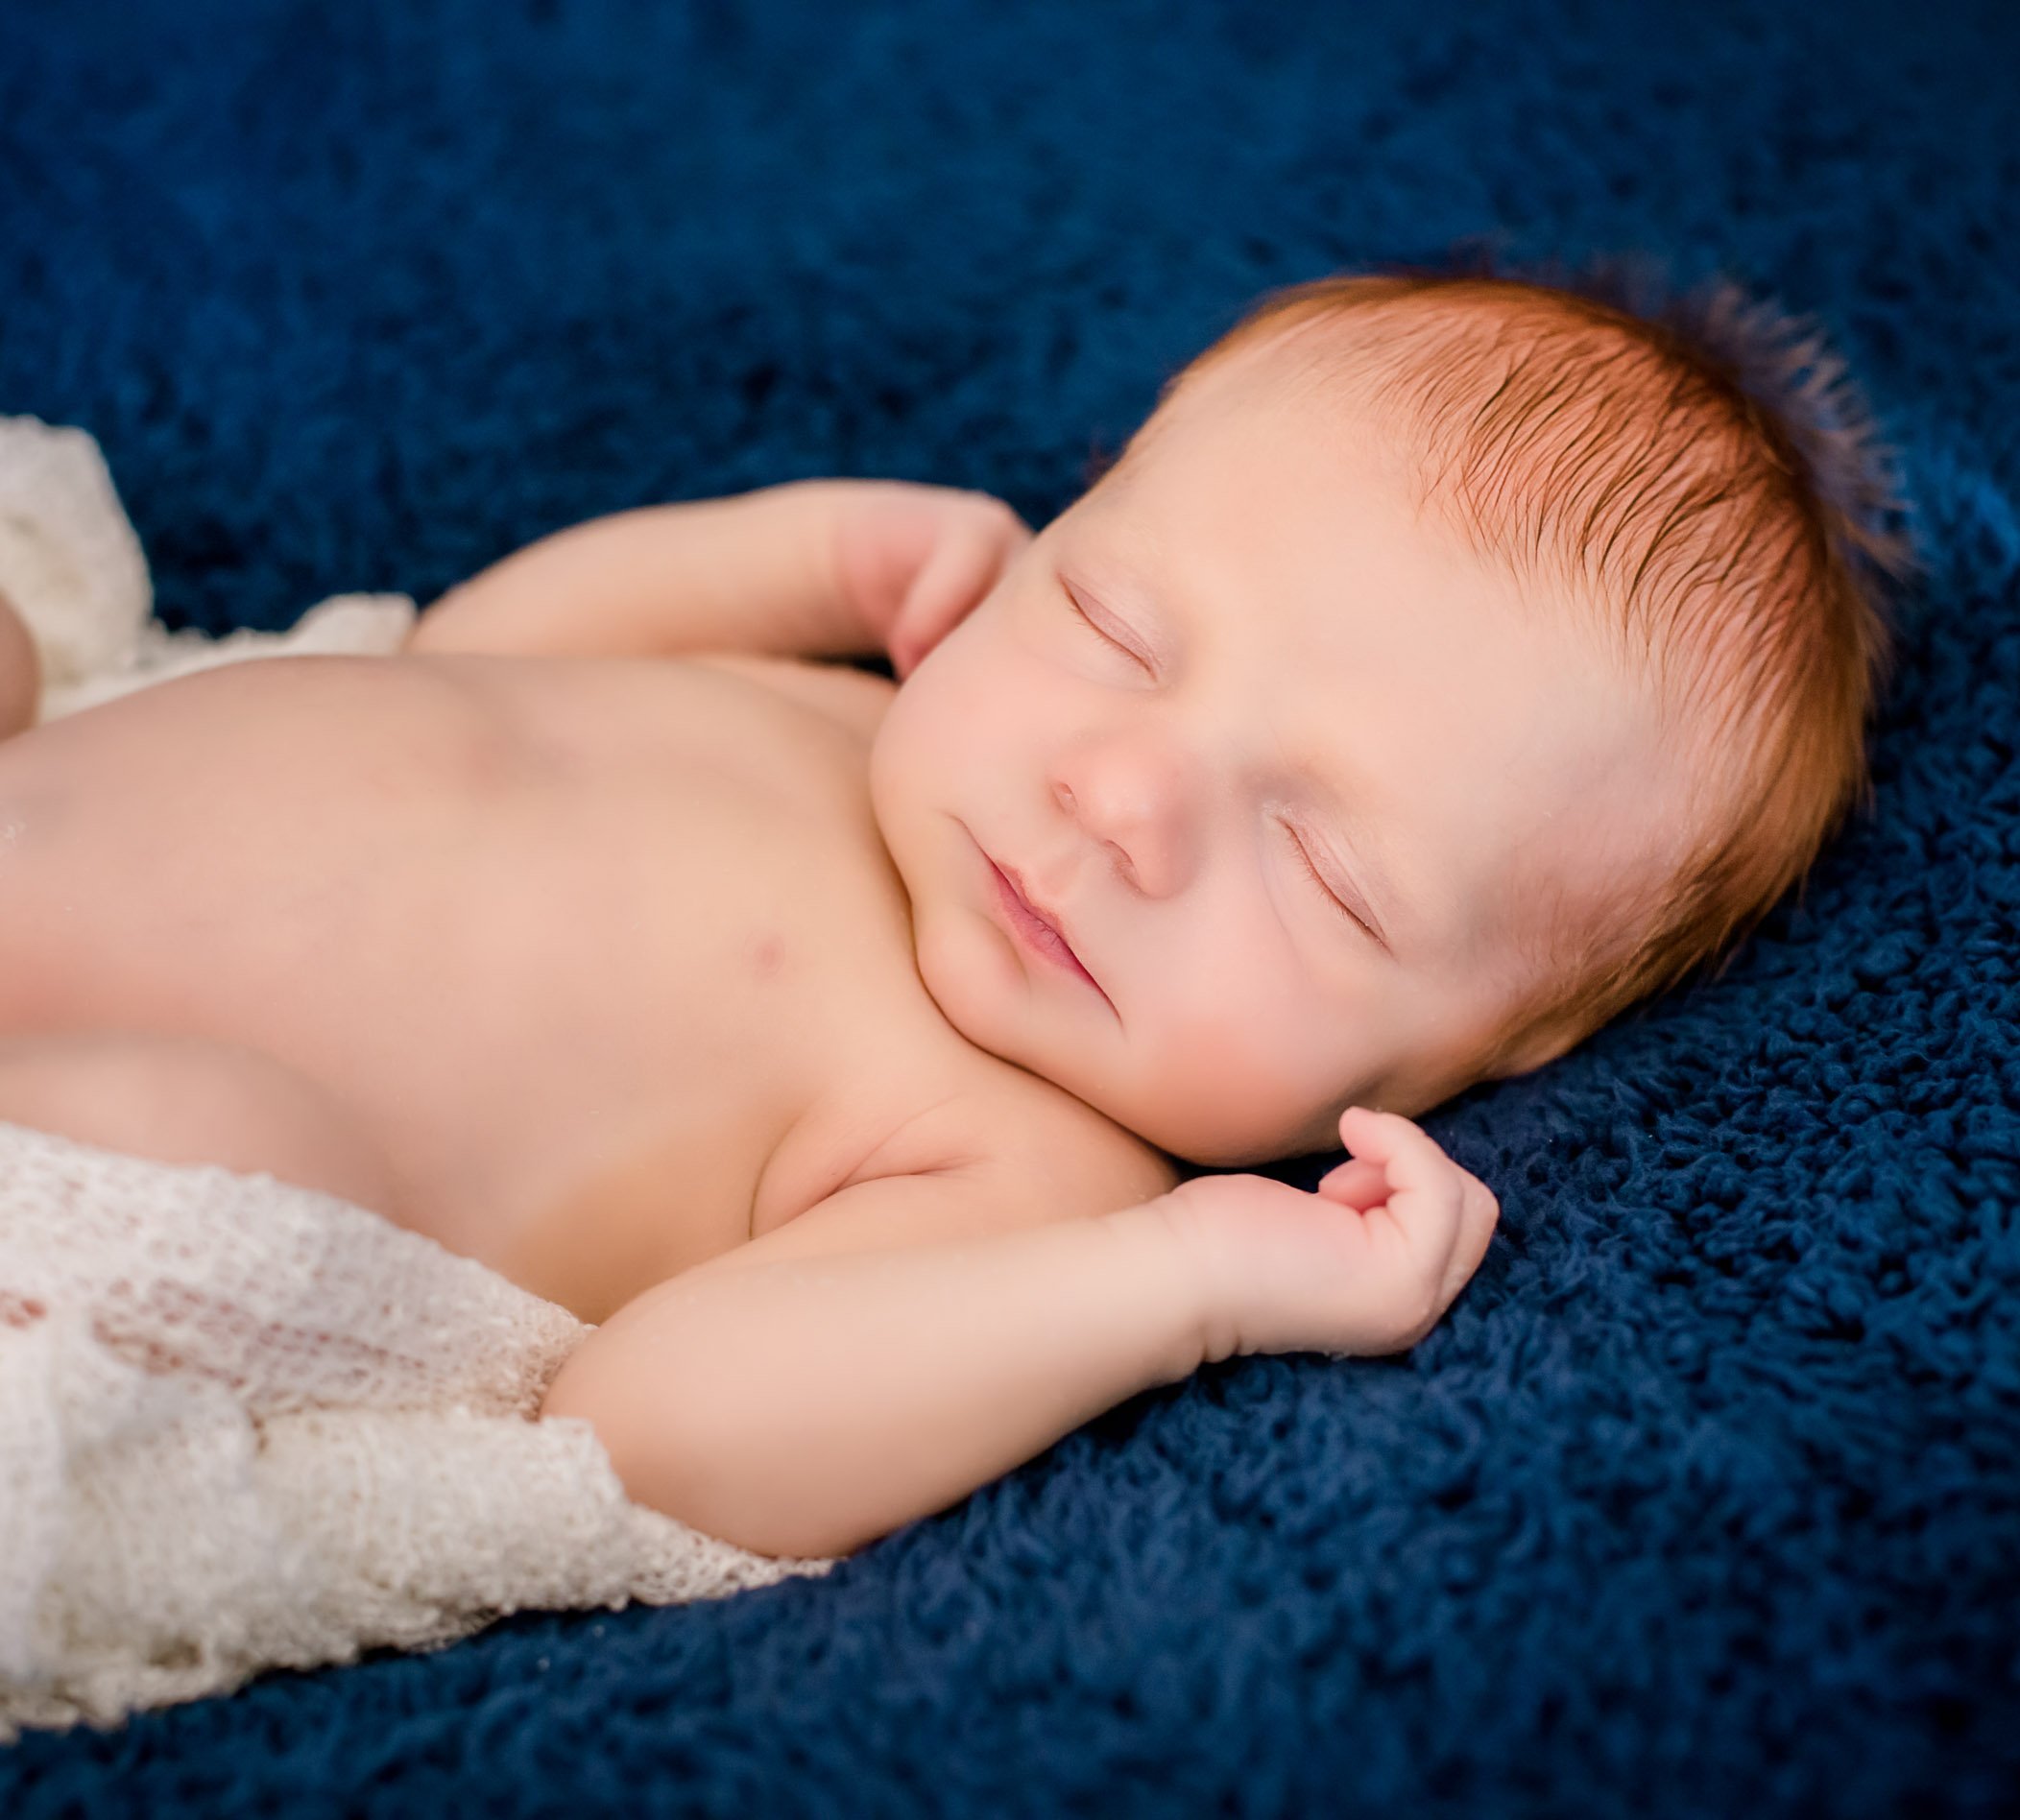 red-headed newborn boy sleeping on back on a blue blanket with white wrapping